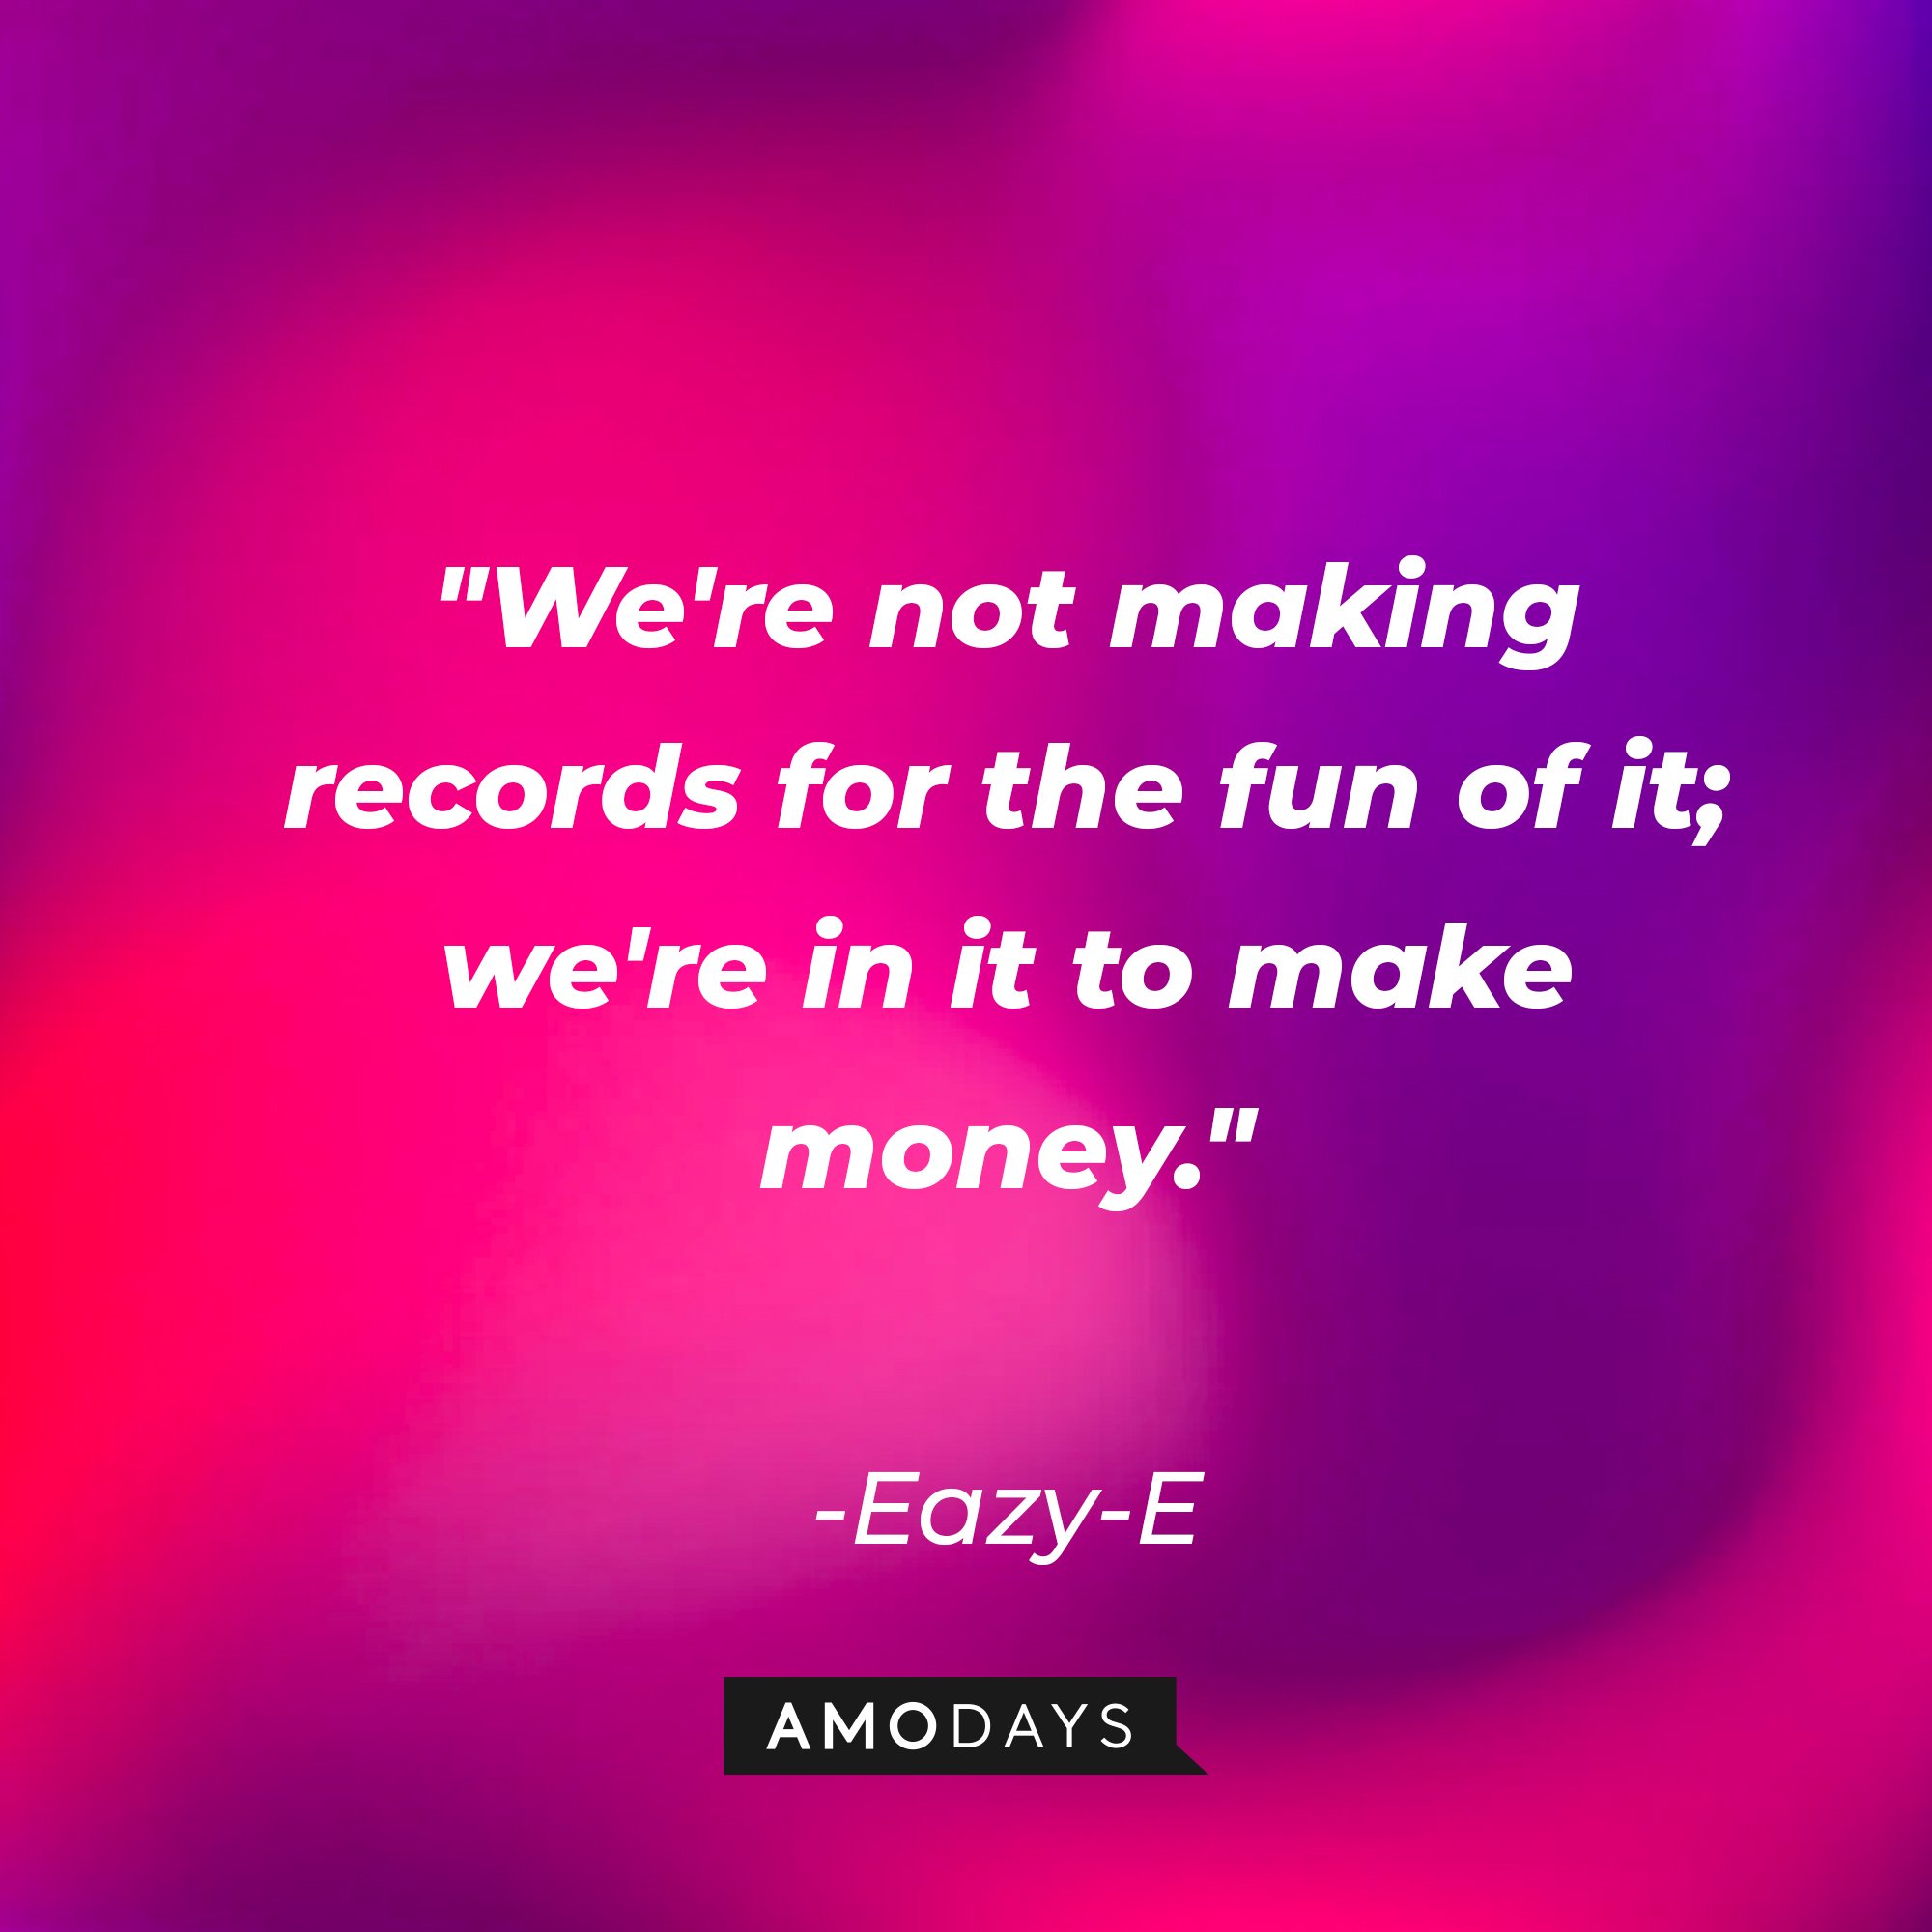 Eazy-E's quote: "We're not making records for the fun of it; we're in it to make money." | Image: AmoDays